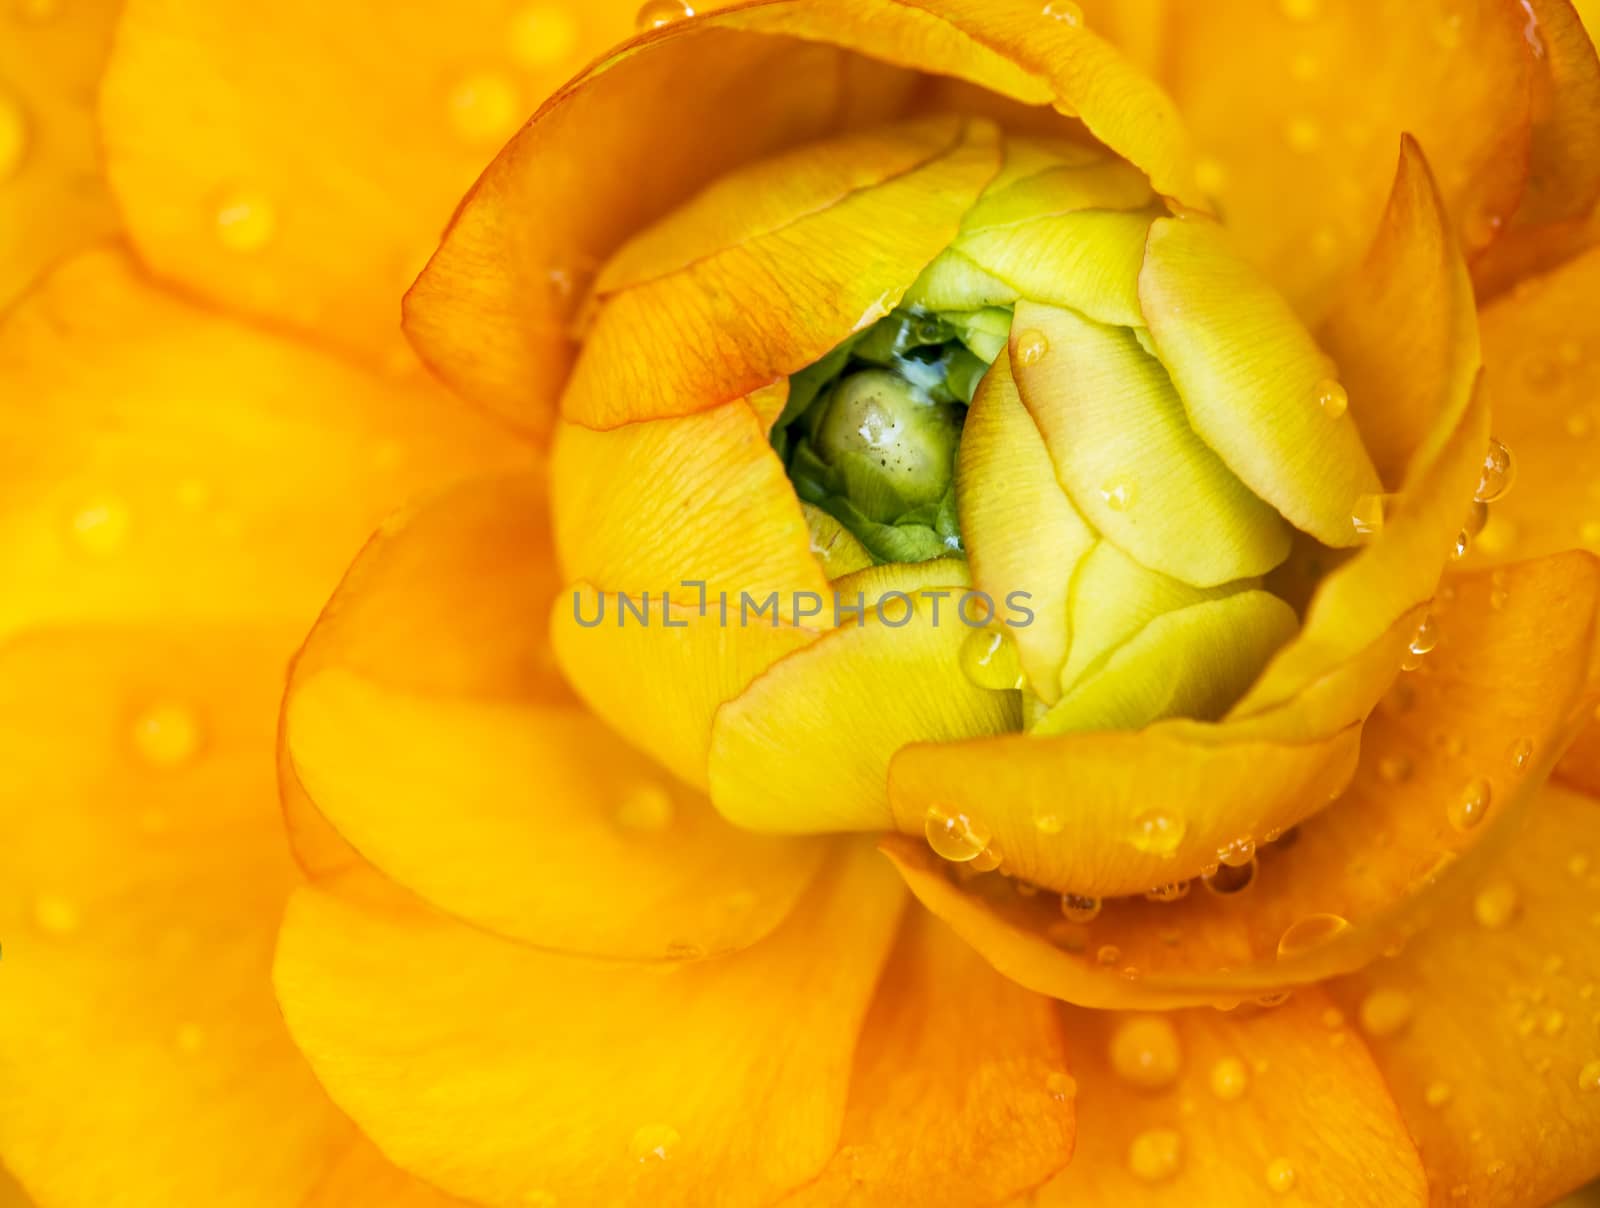 Raindrops On Flower by leieng